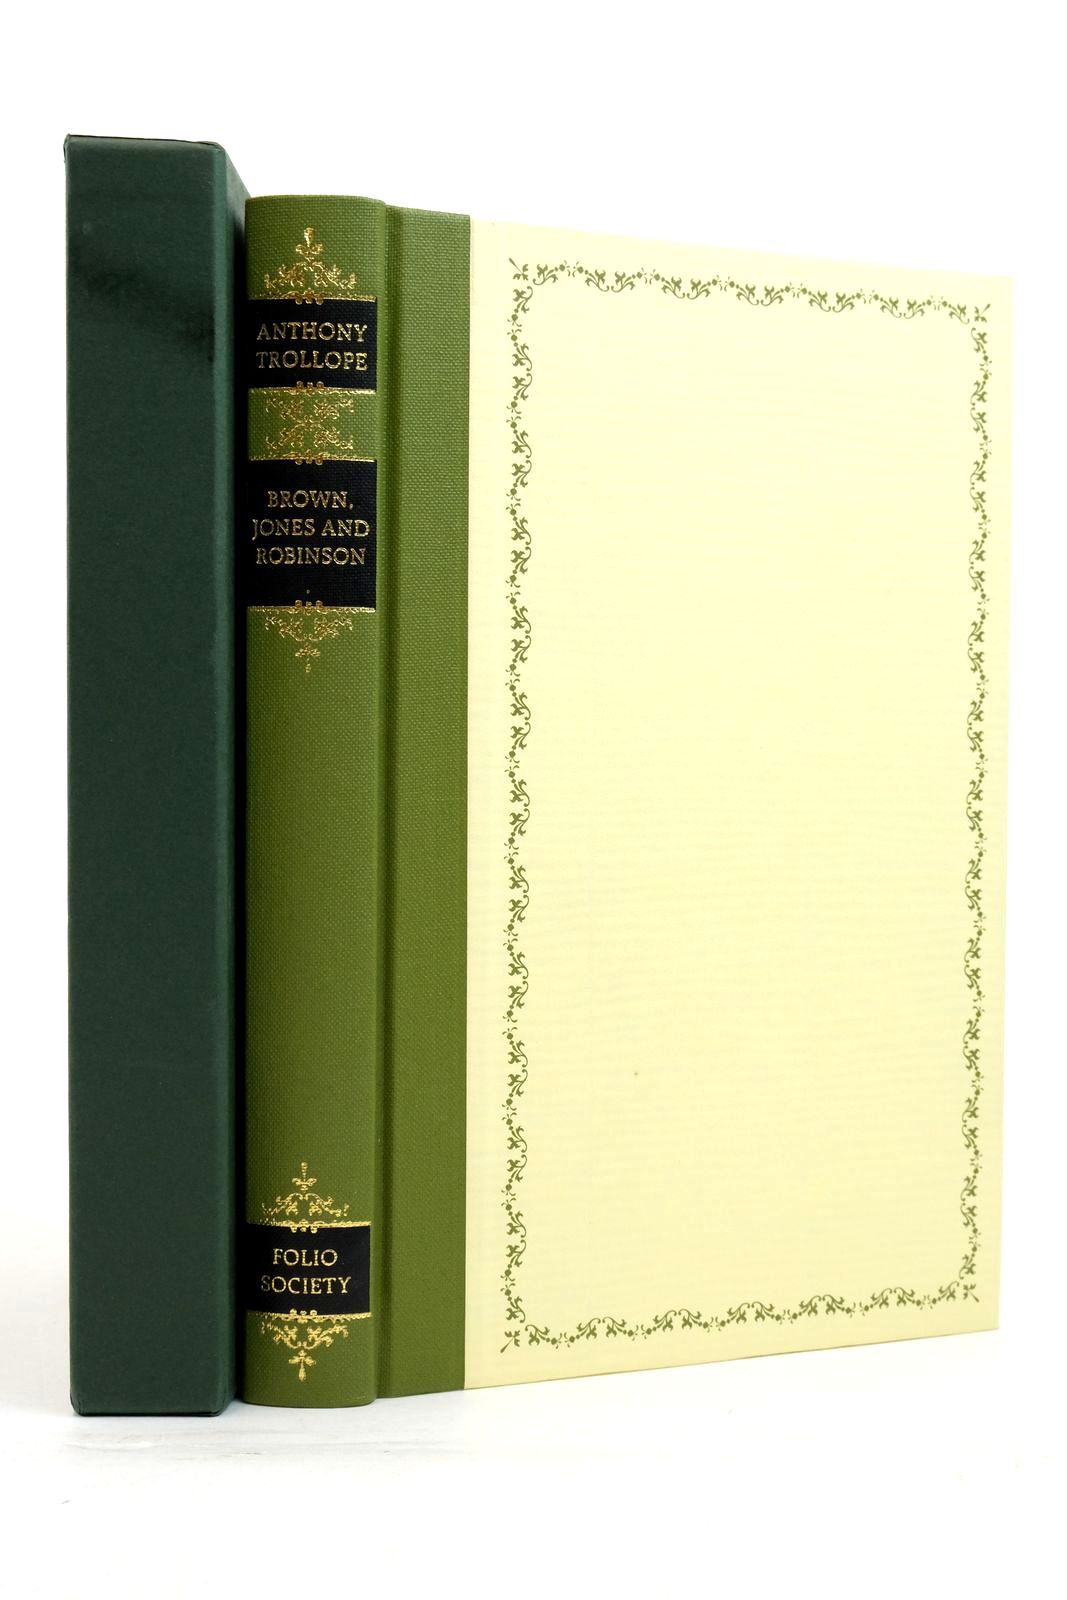 Photo of THE STRUGGLES OF BROWN, JONES AND ROBINSON written by Trollope, Anthony illustrated by Thomas, Llewellyn published by Folio Society (STOCK CODE: 2137883)  for sale by Stella & Rose's Books